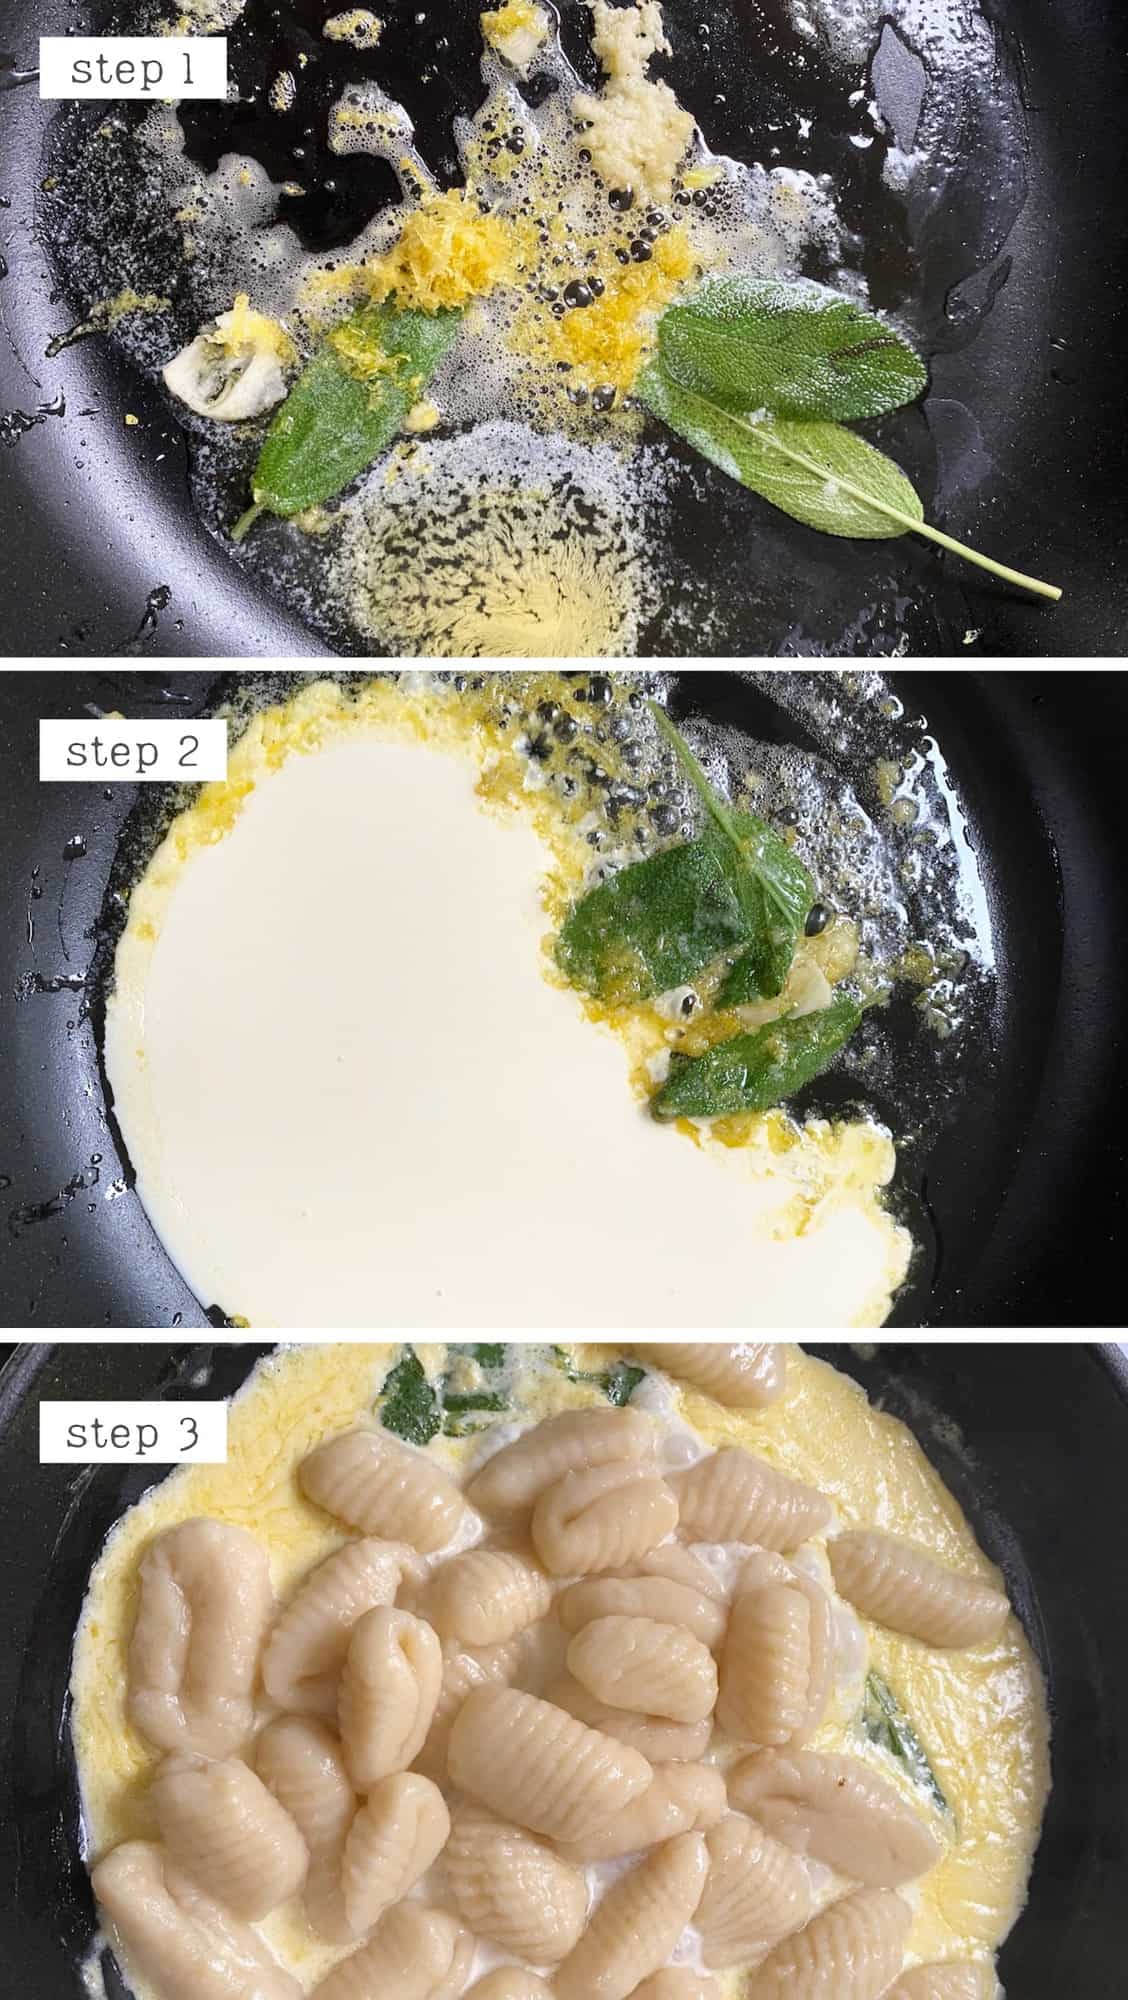 Steps for cooking gnocchi with sauce